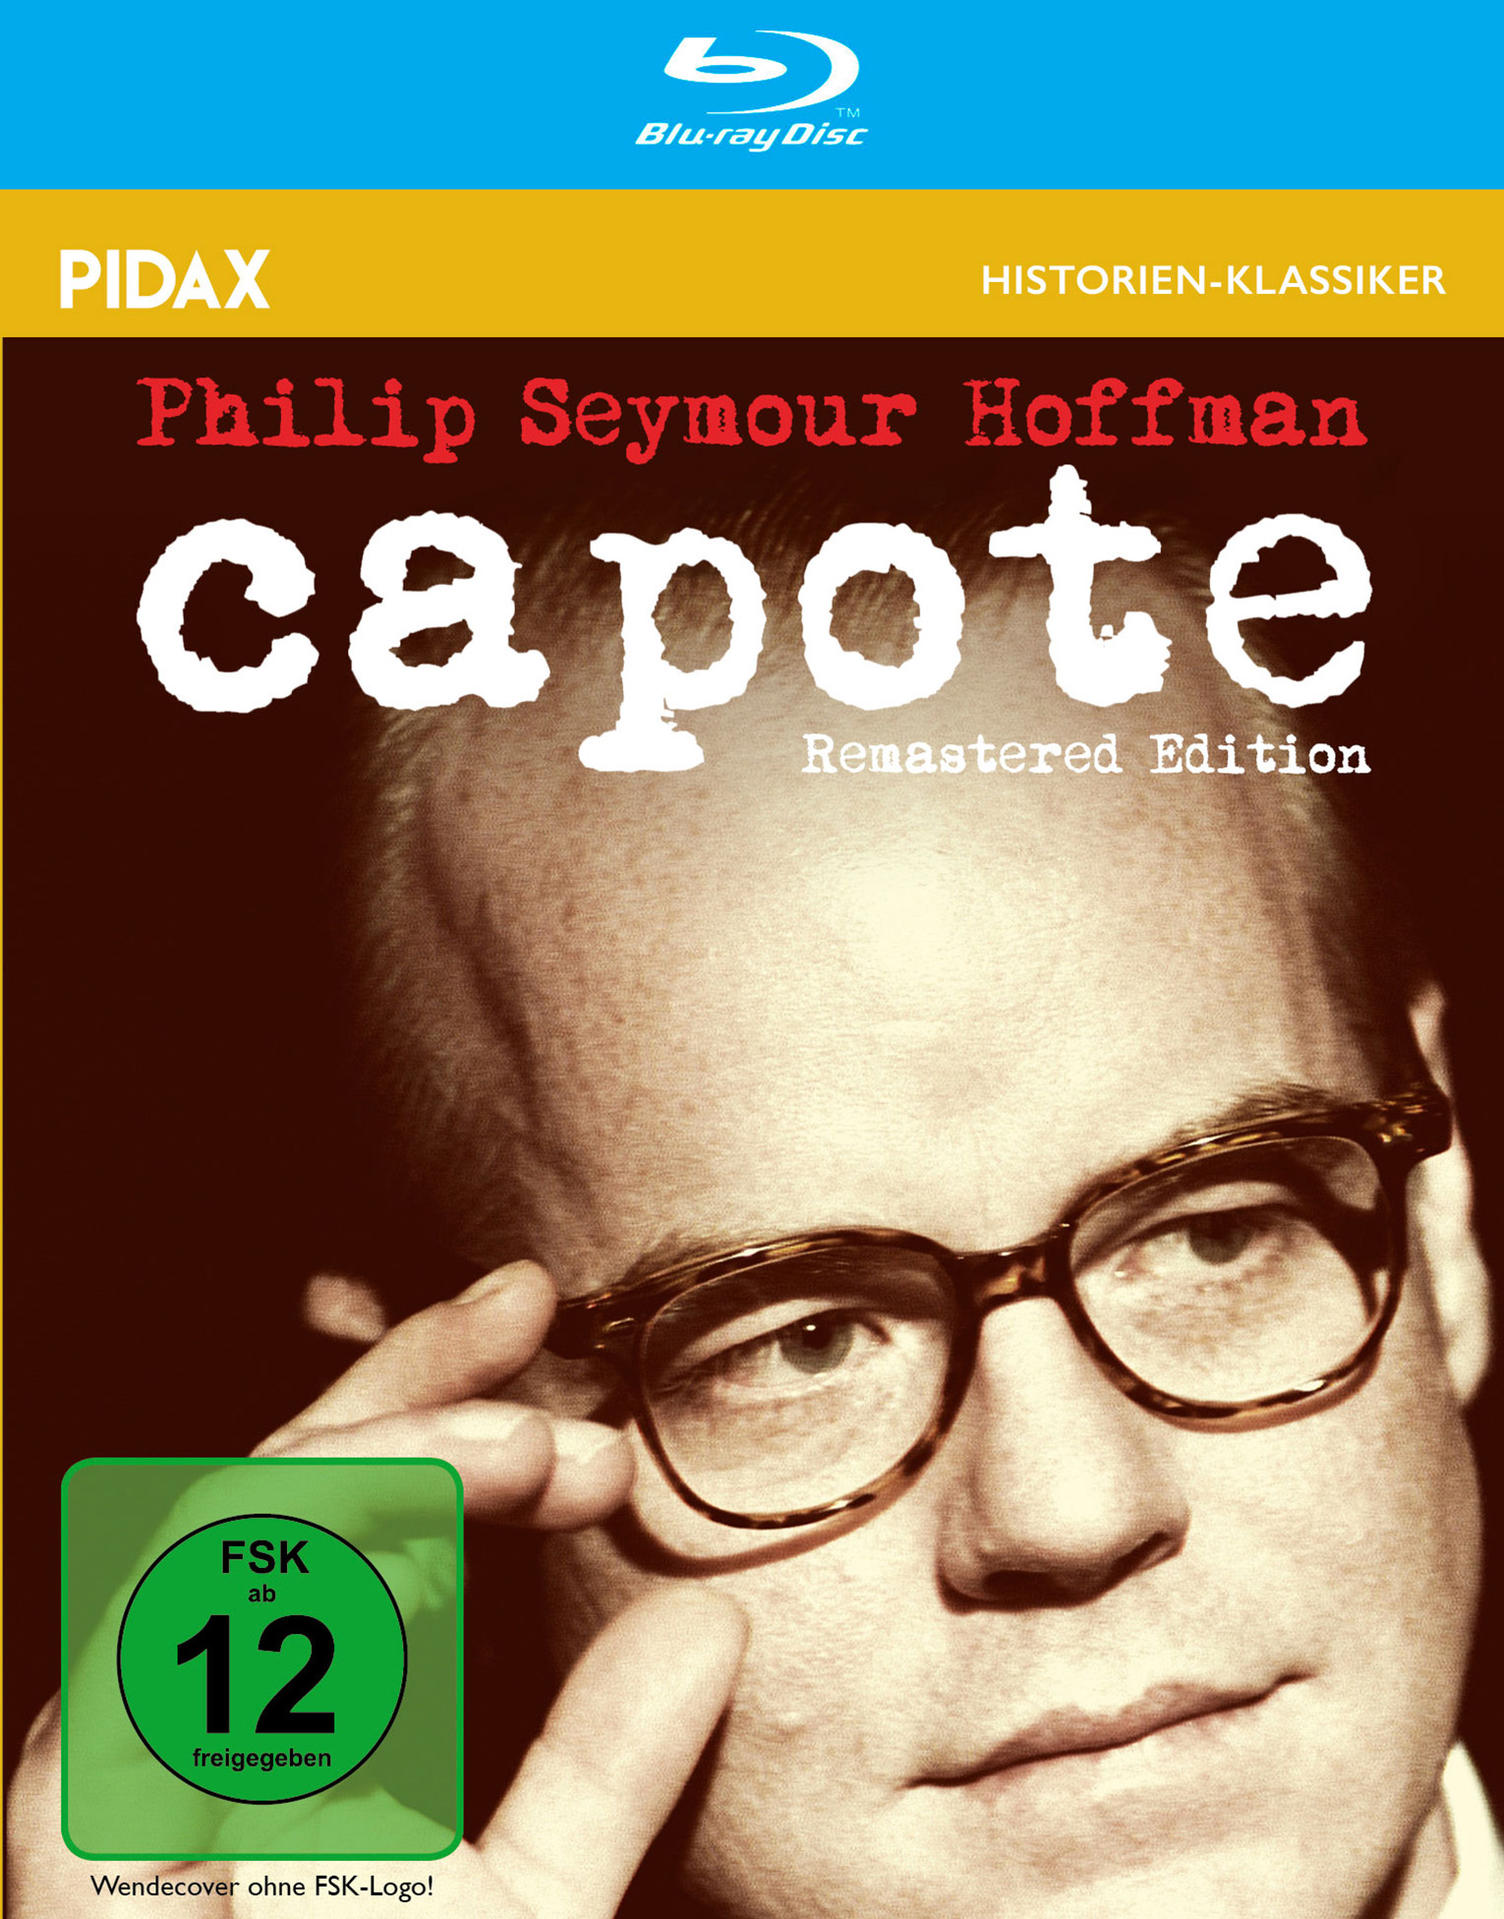 - Remastered Capote Blu-ray Edition